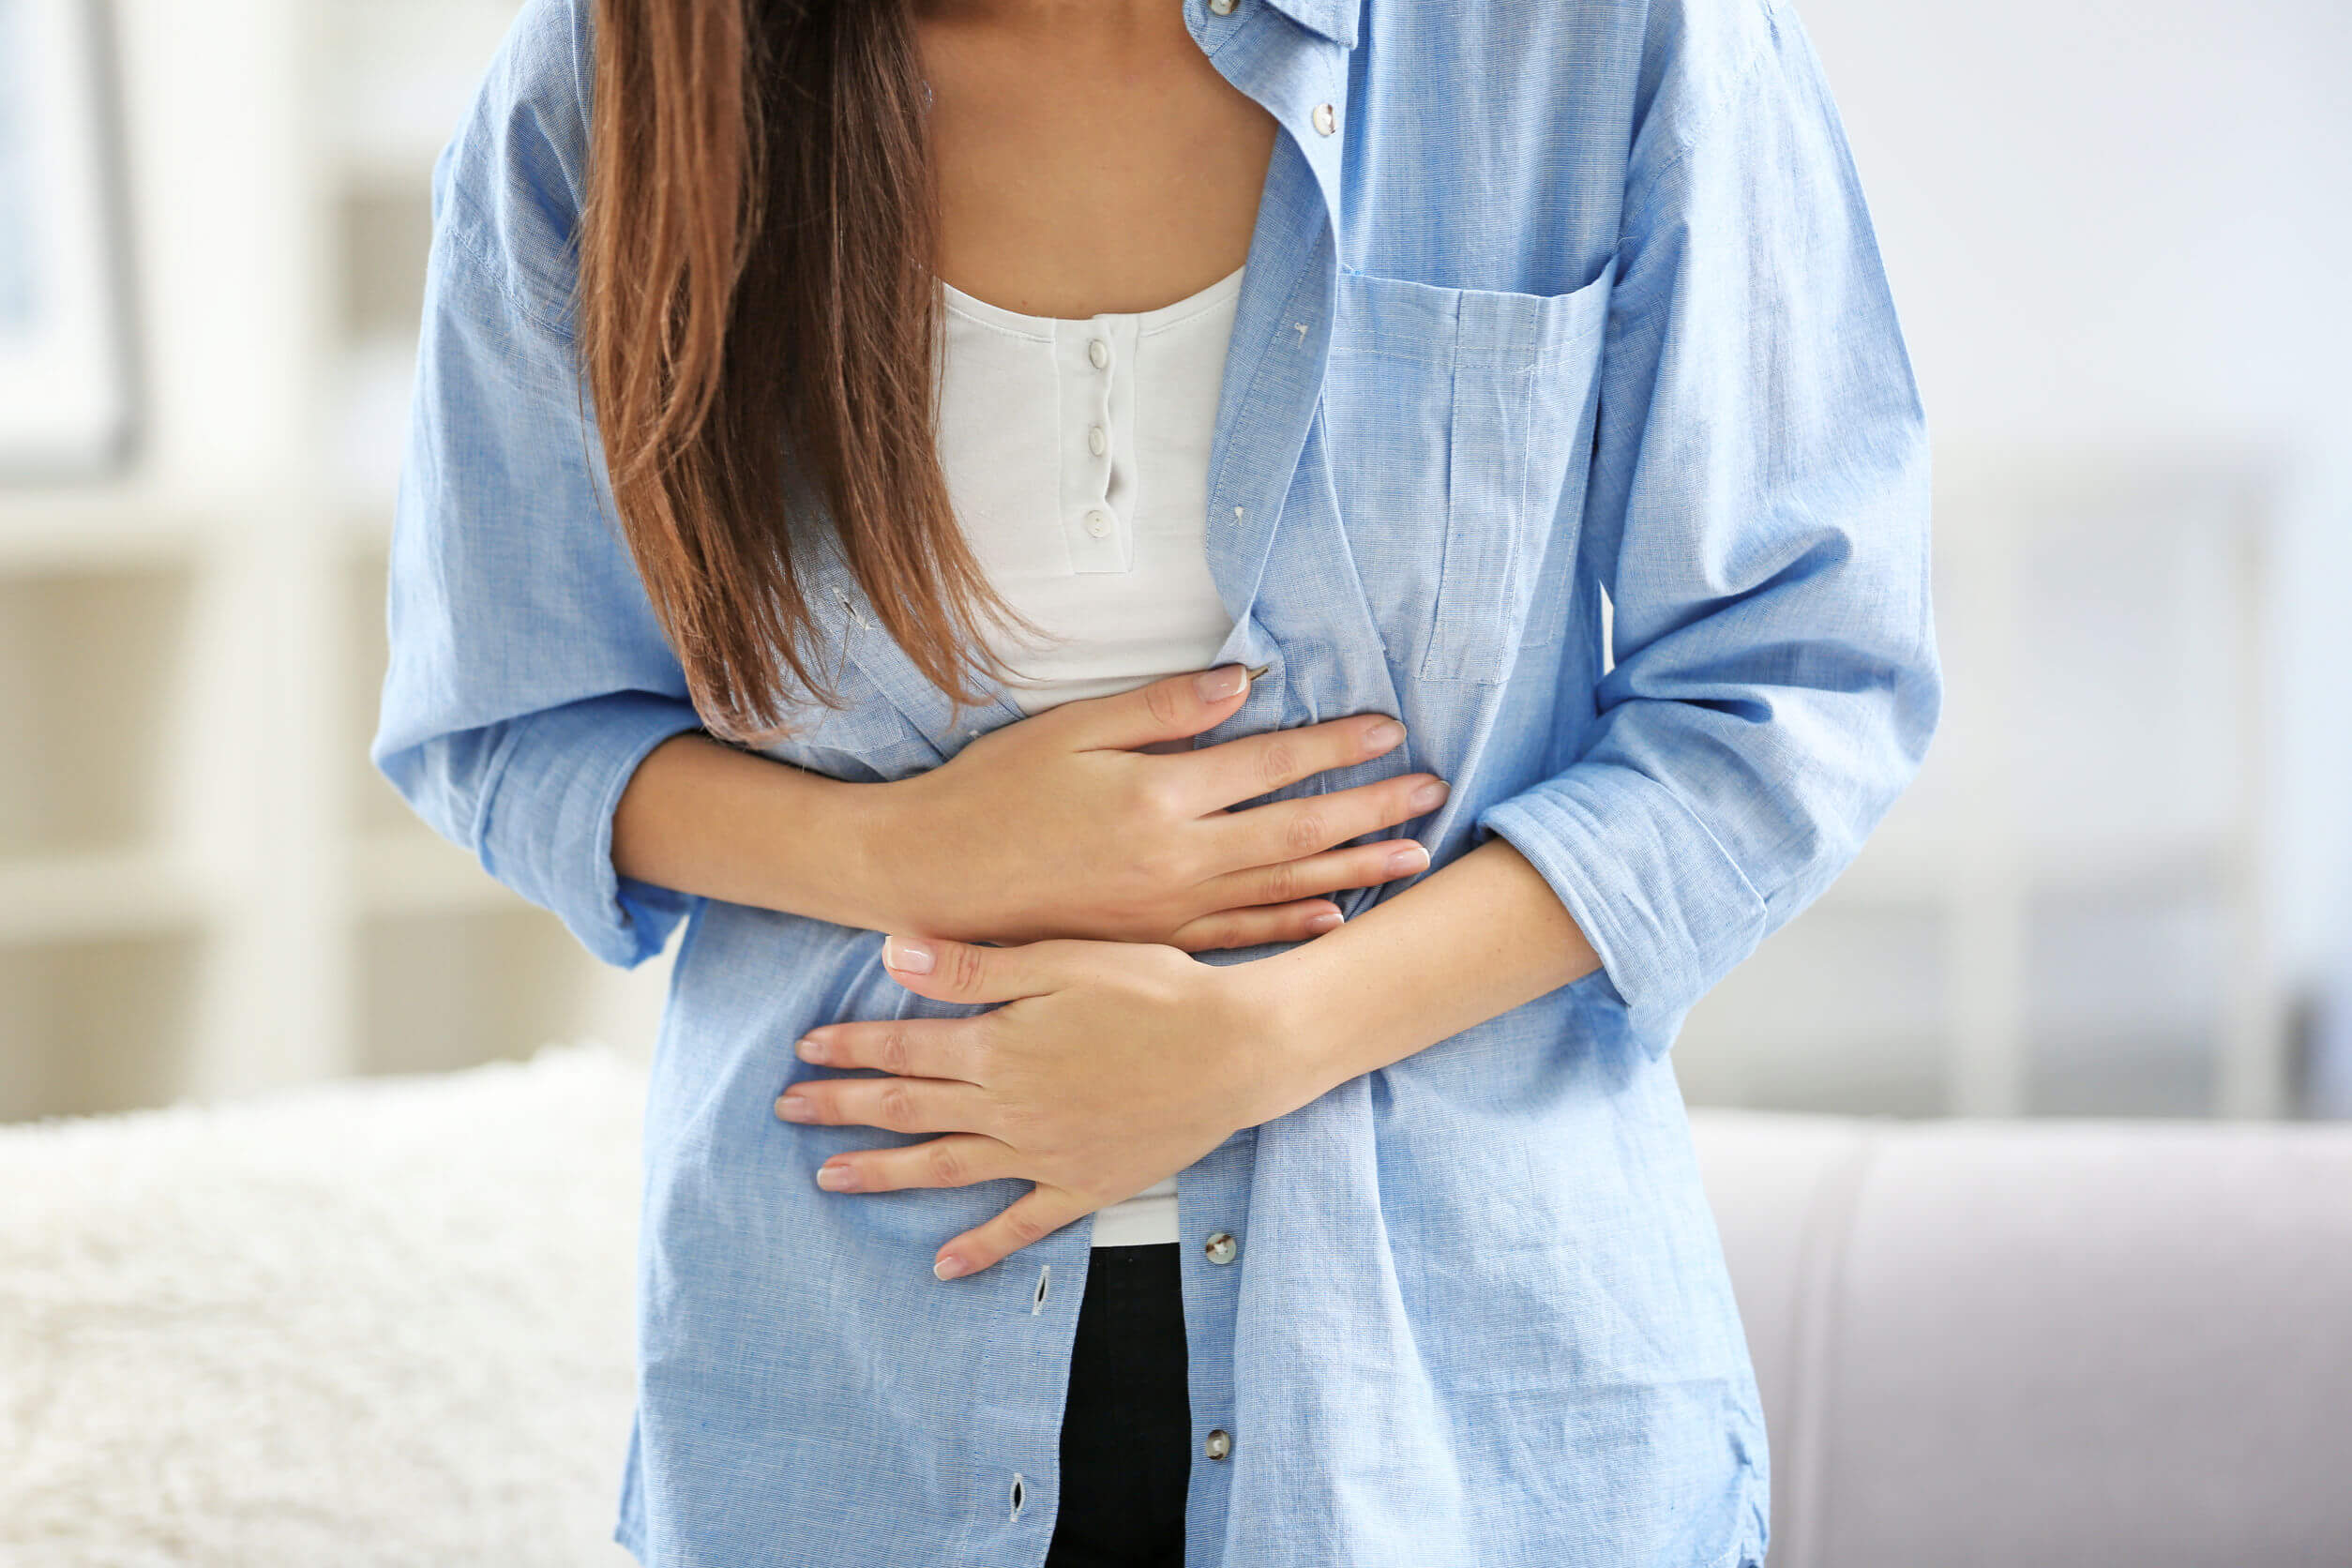 Implantation bleeding can be related to an ectopic pregnancy.